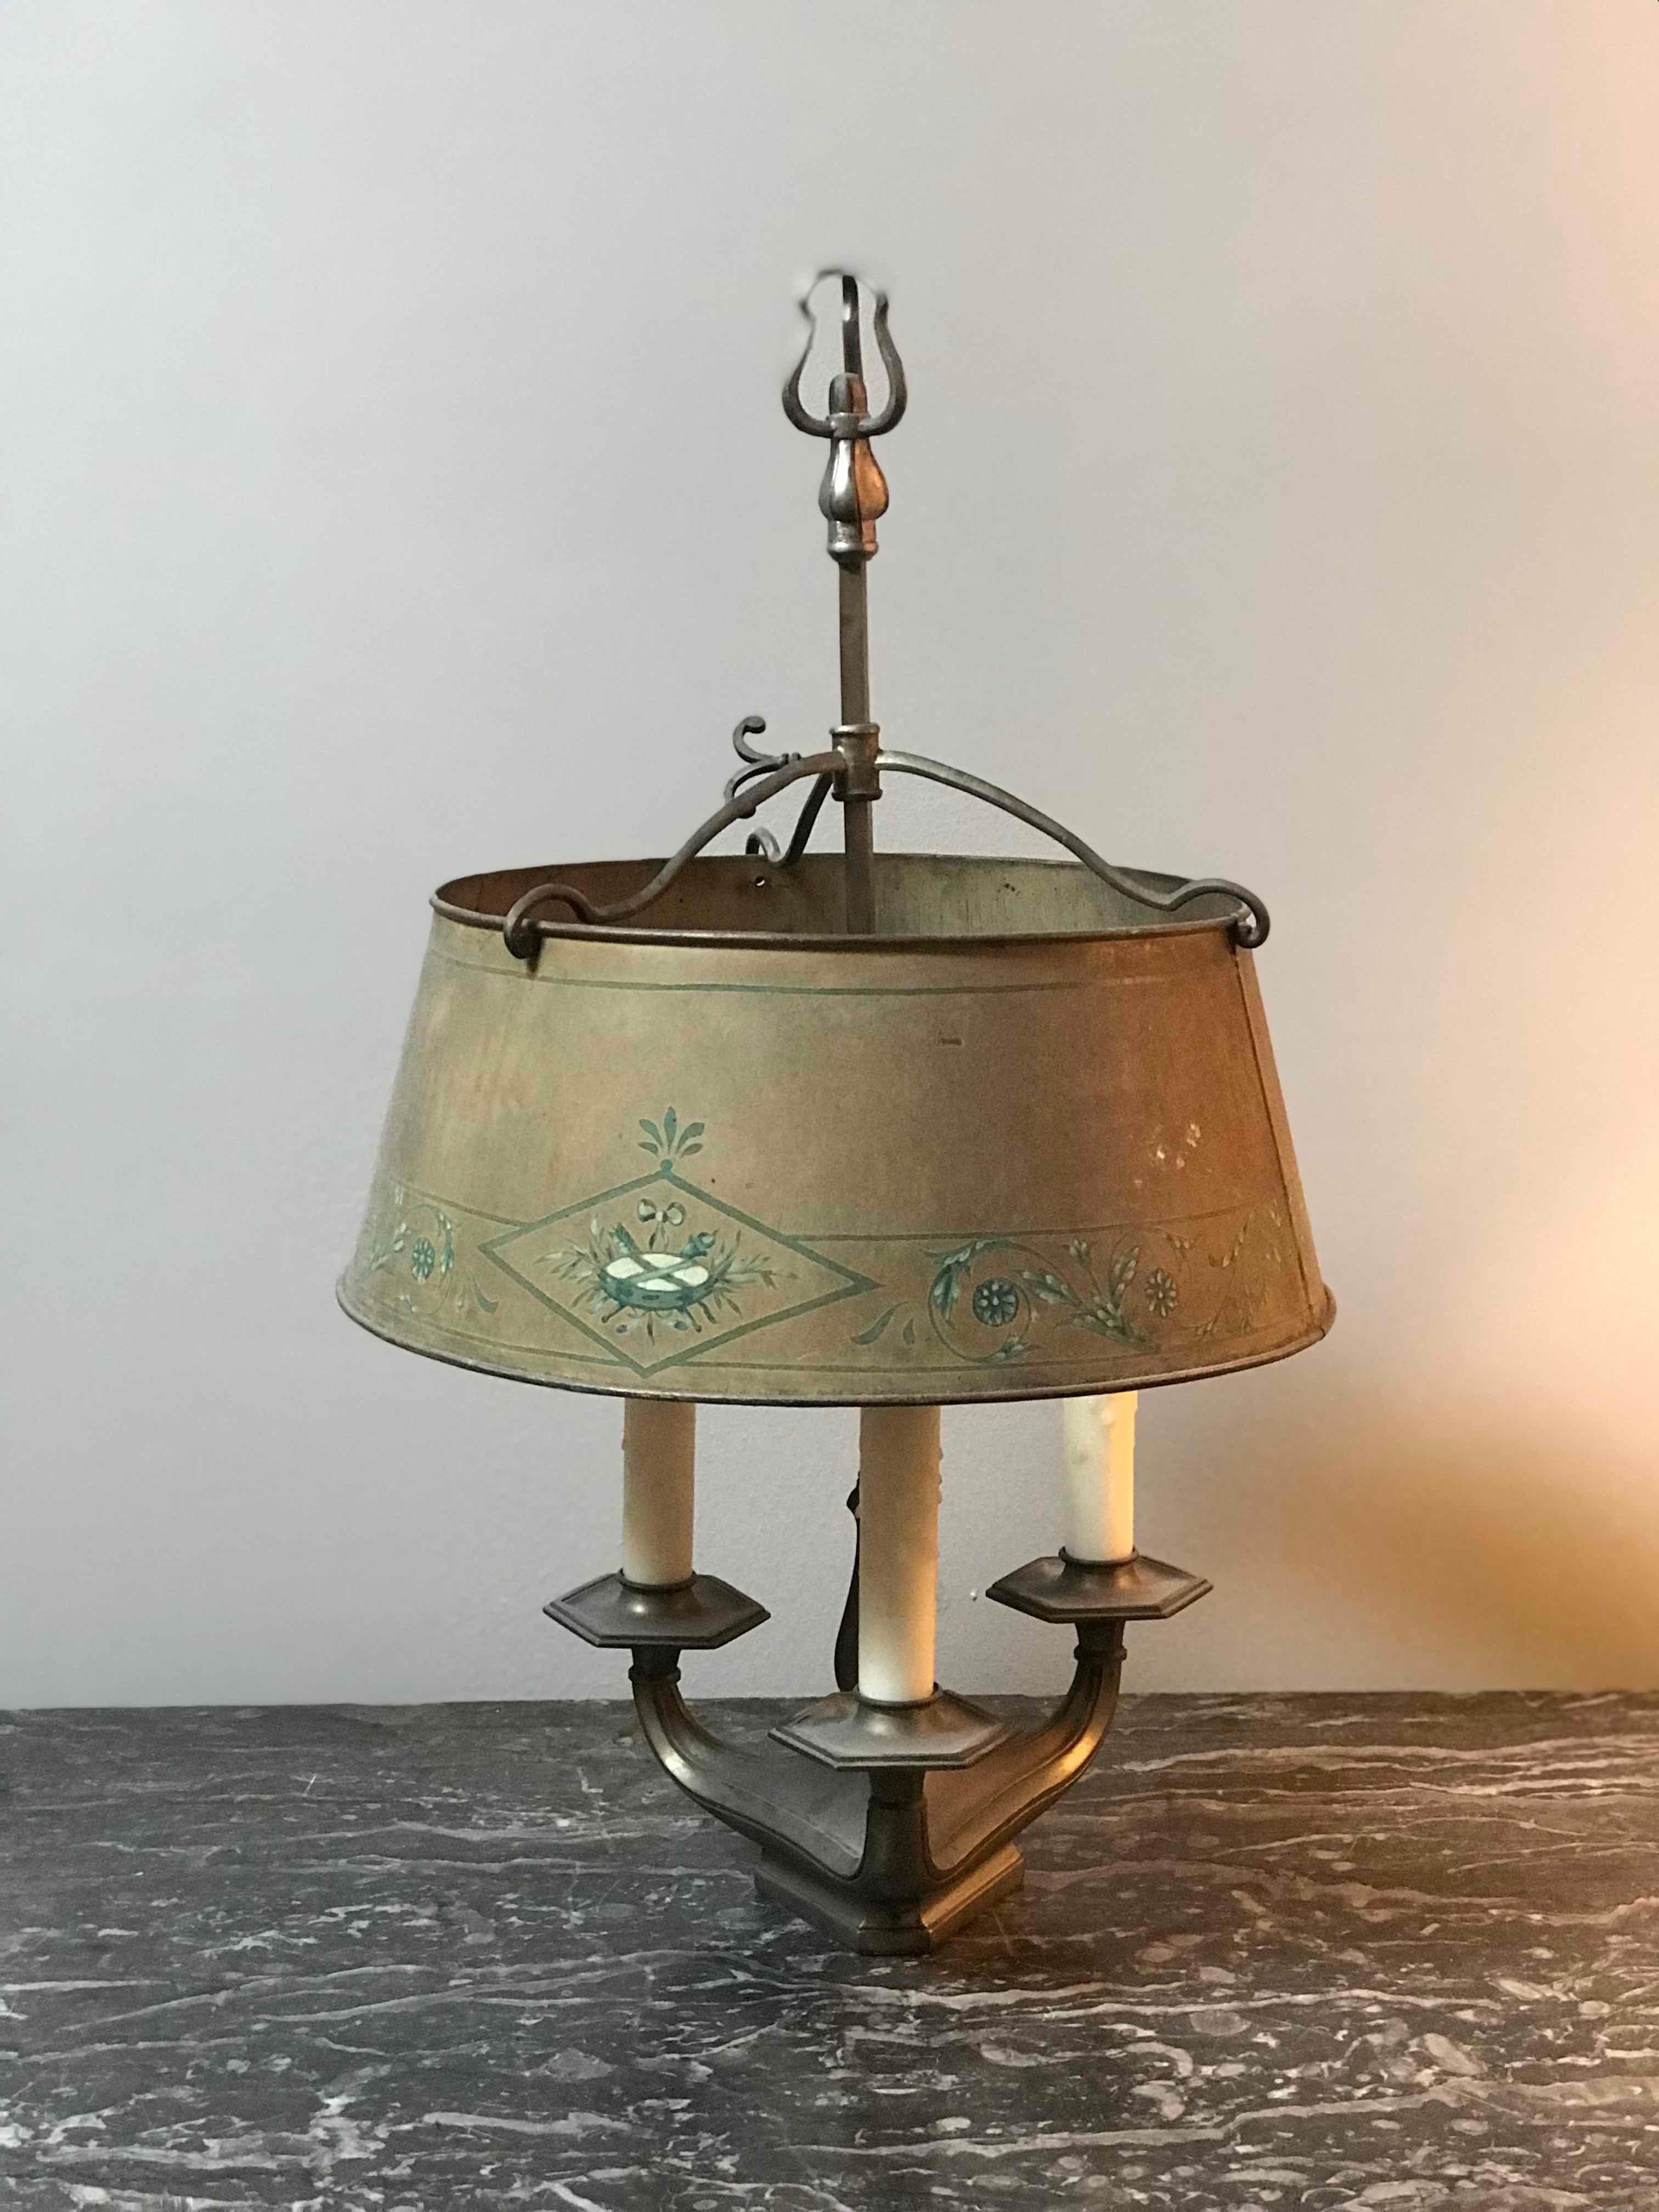 1860s French Bouillotte lamp featuring three candlesticks with brackets and a golden taupe tole shade accented by a decorative teal floral border. Bouillotte is a gambling card game that gained popularity during the early days of the French